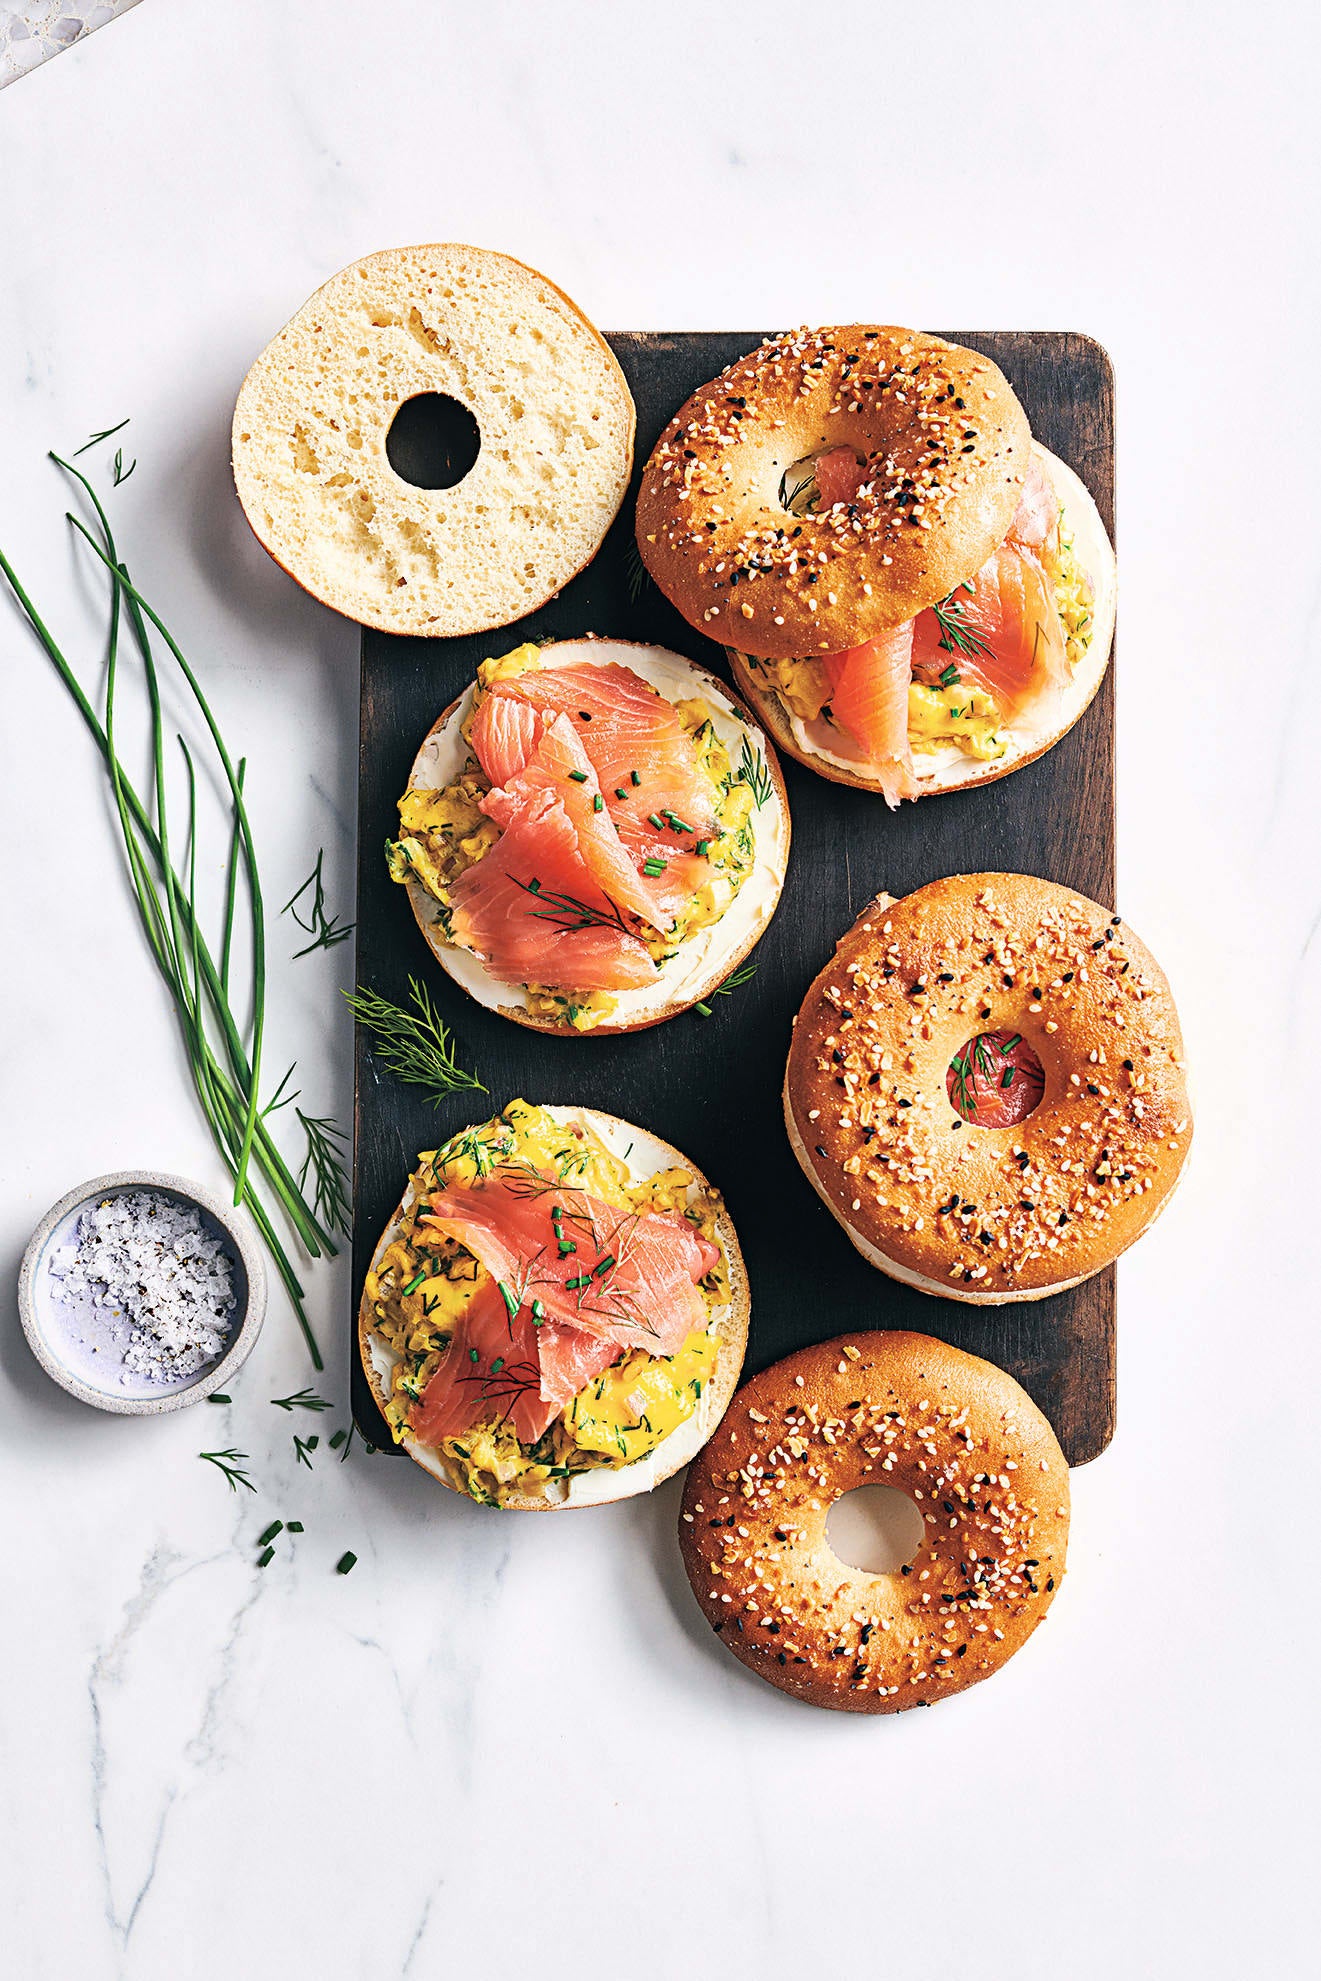 Photo of Smoked salmon & egg bagels by WW